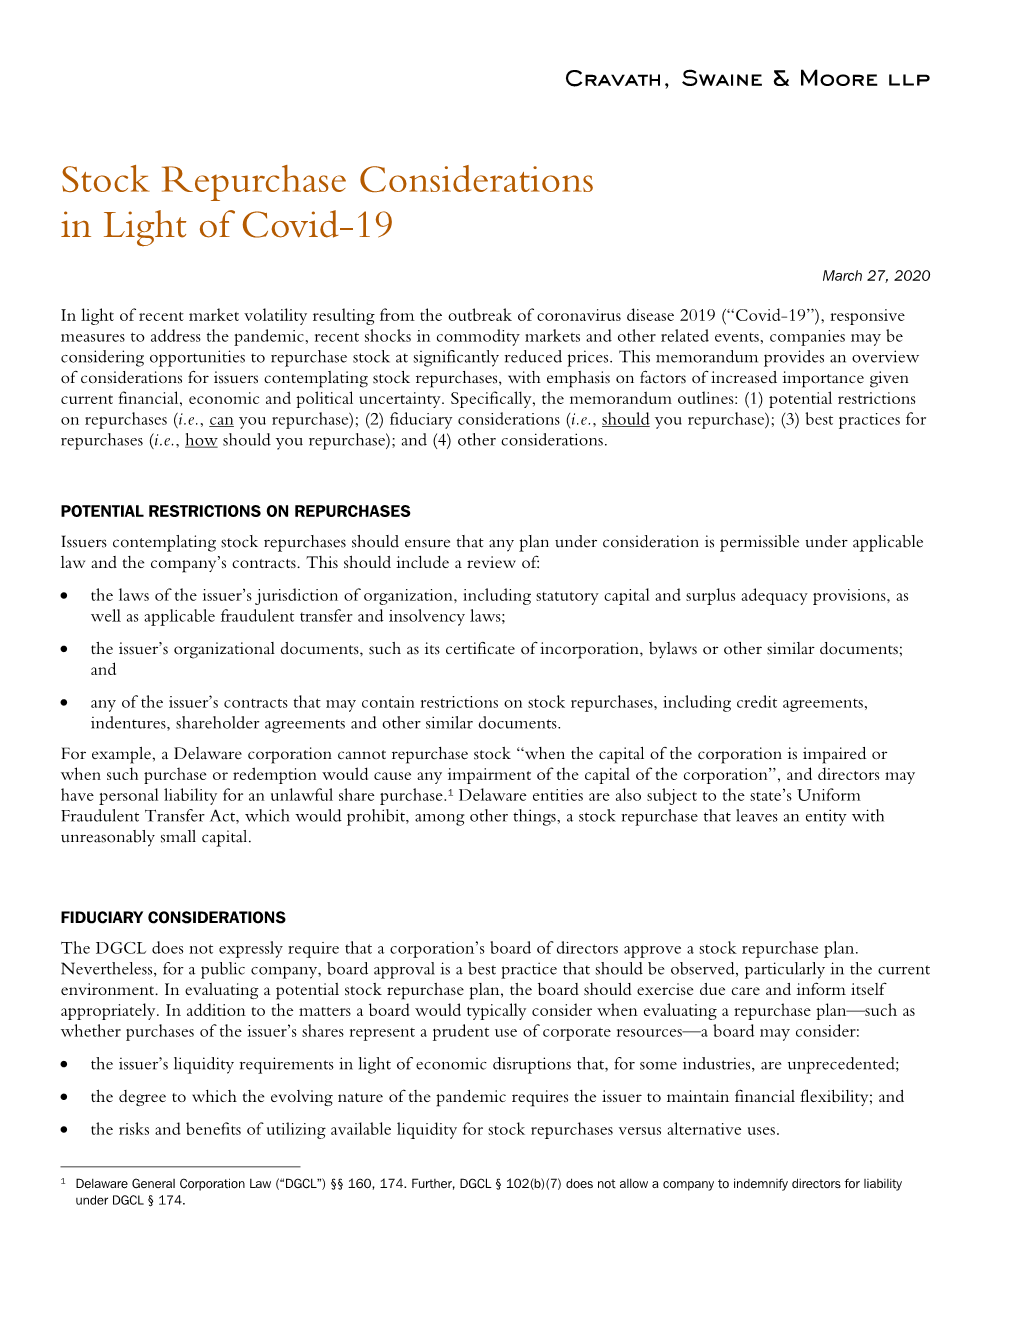 Stock Repurchase Considerations in Light of Covid-19